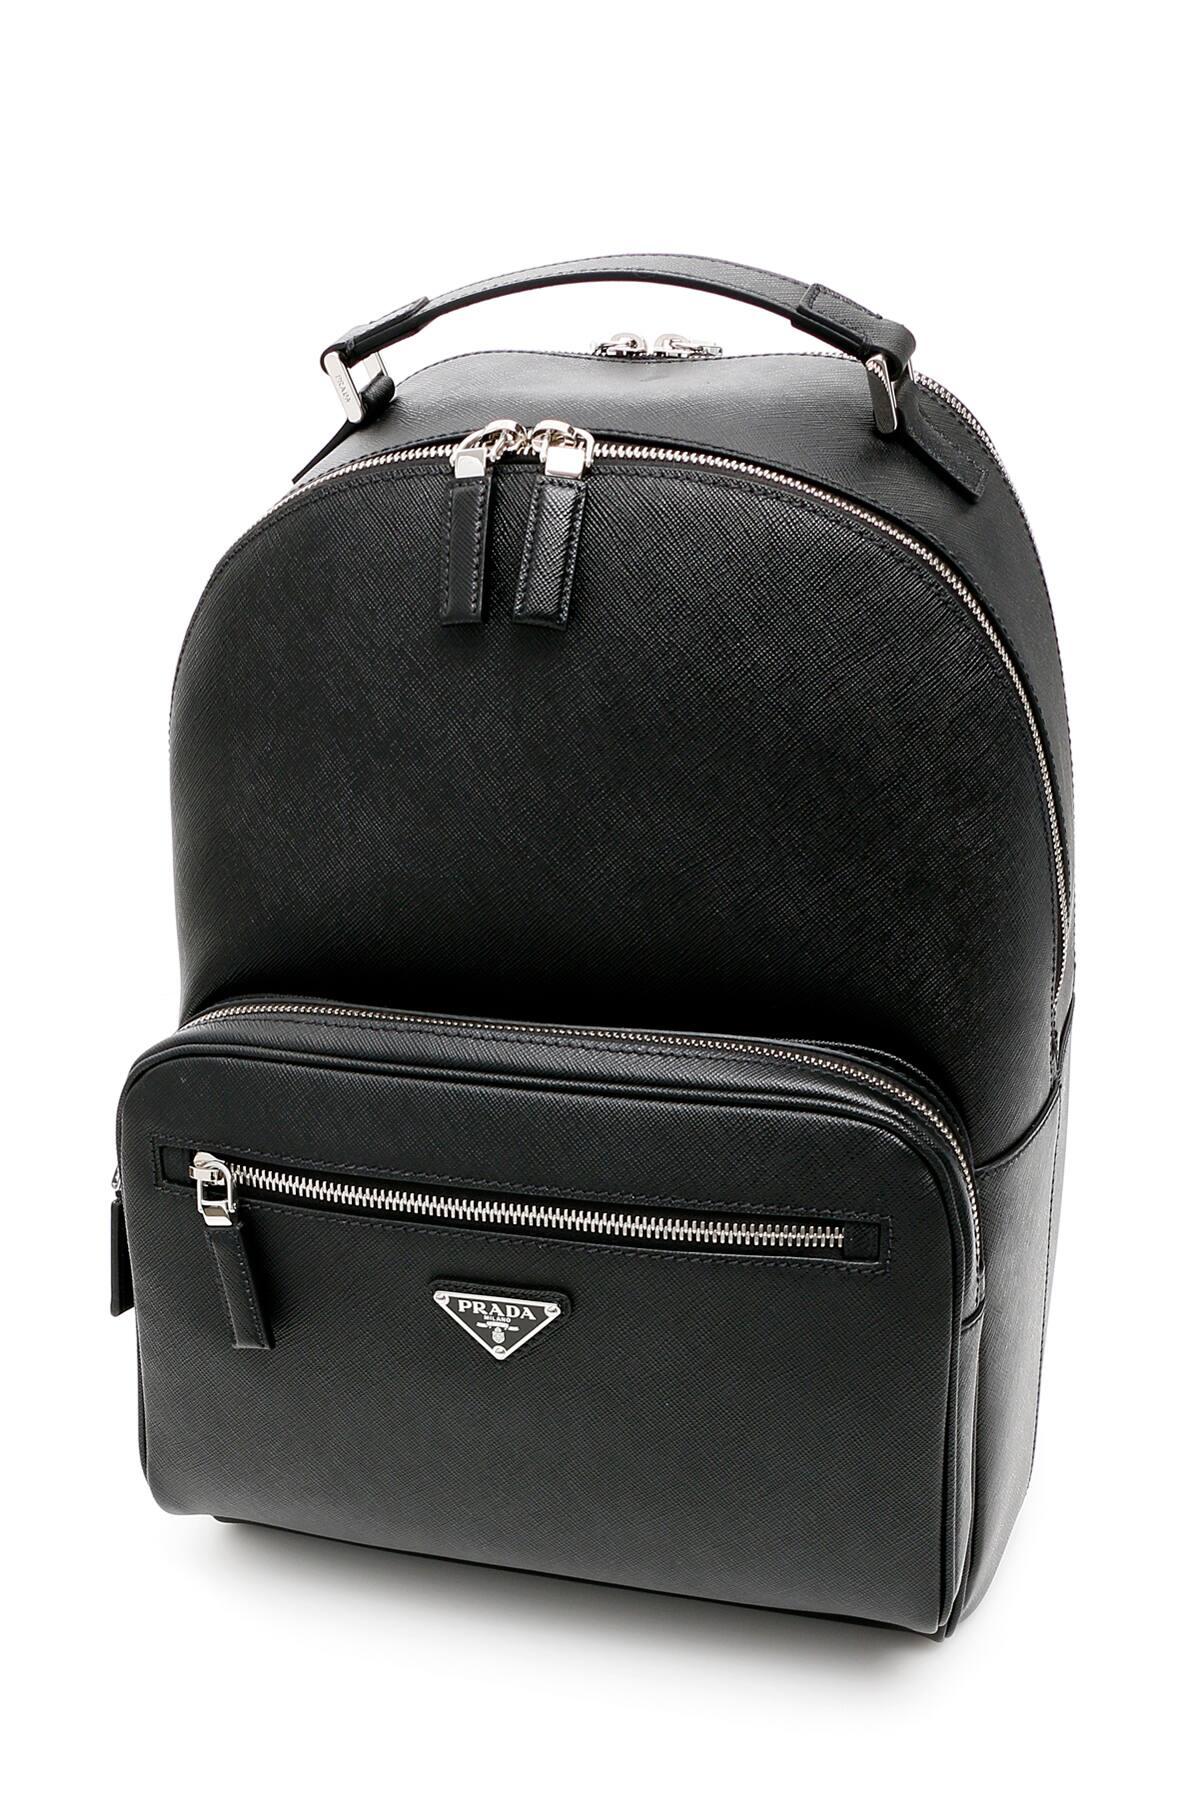 Prada Saffiano Leather Backpack in Black for Men | Lyst